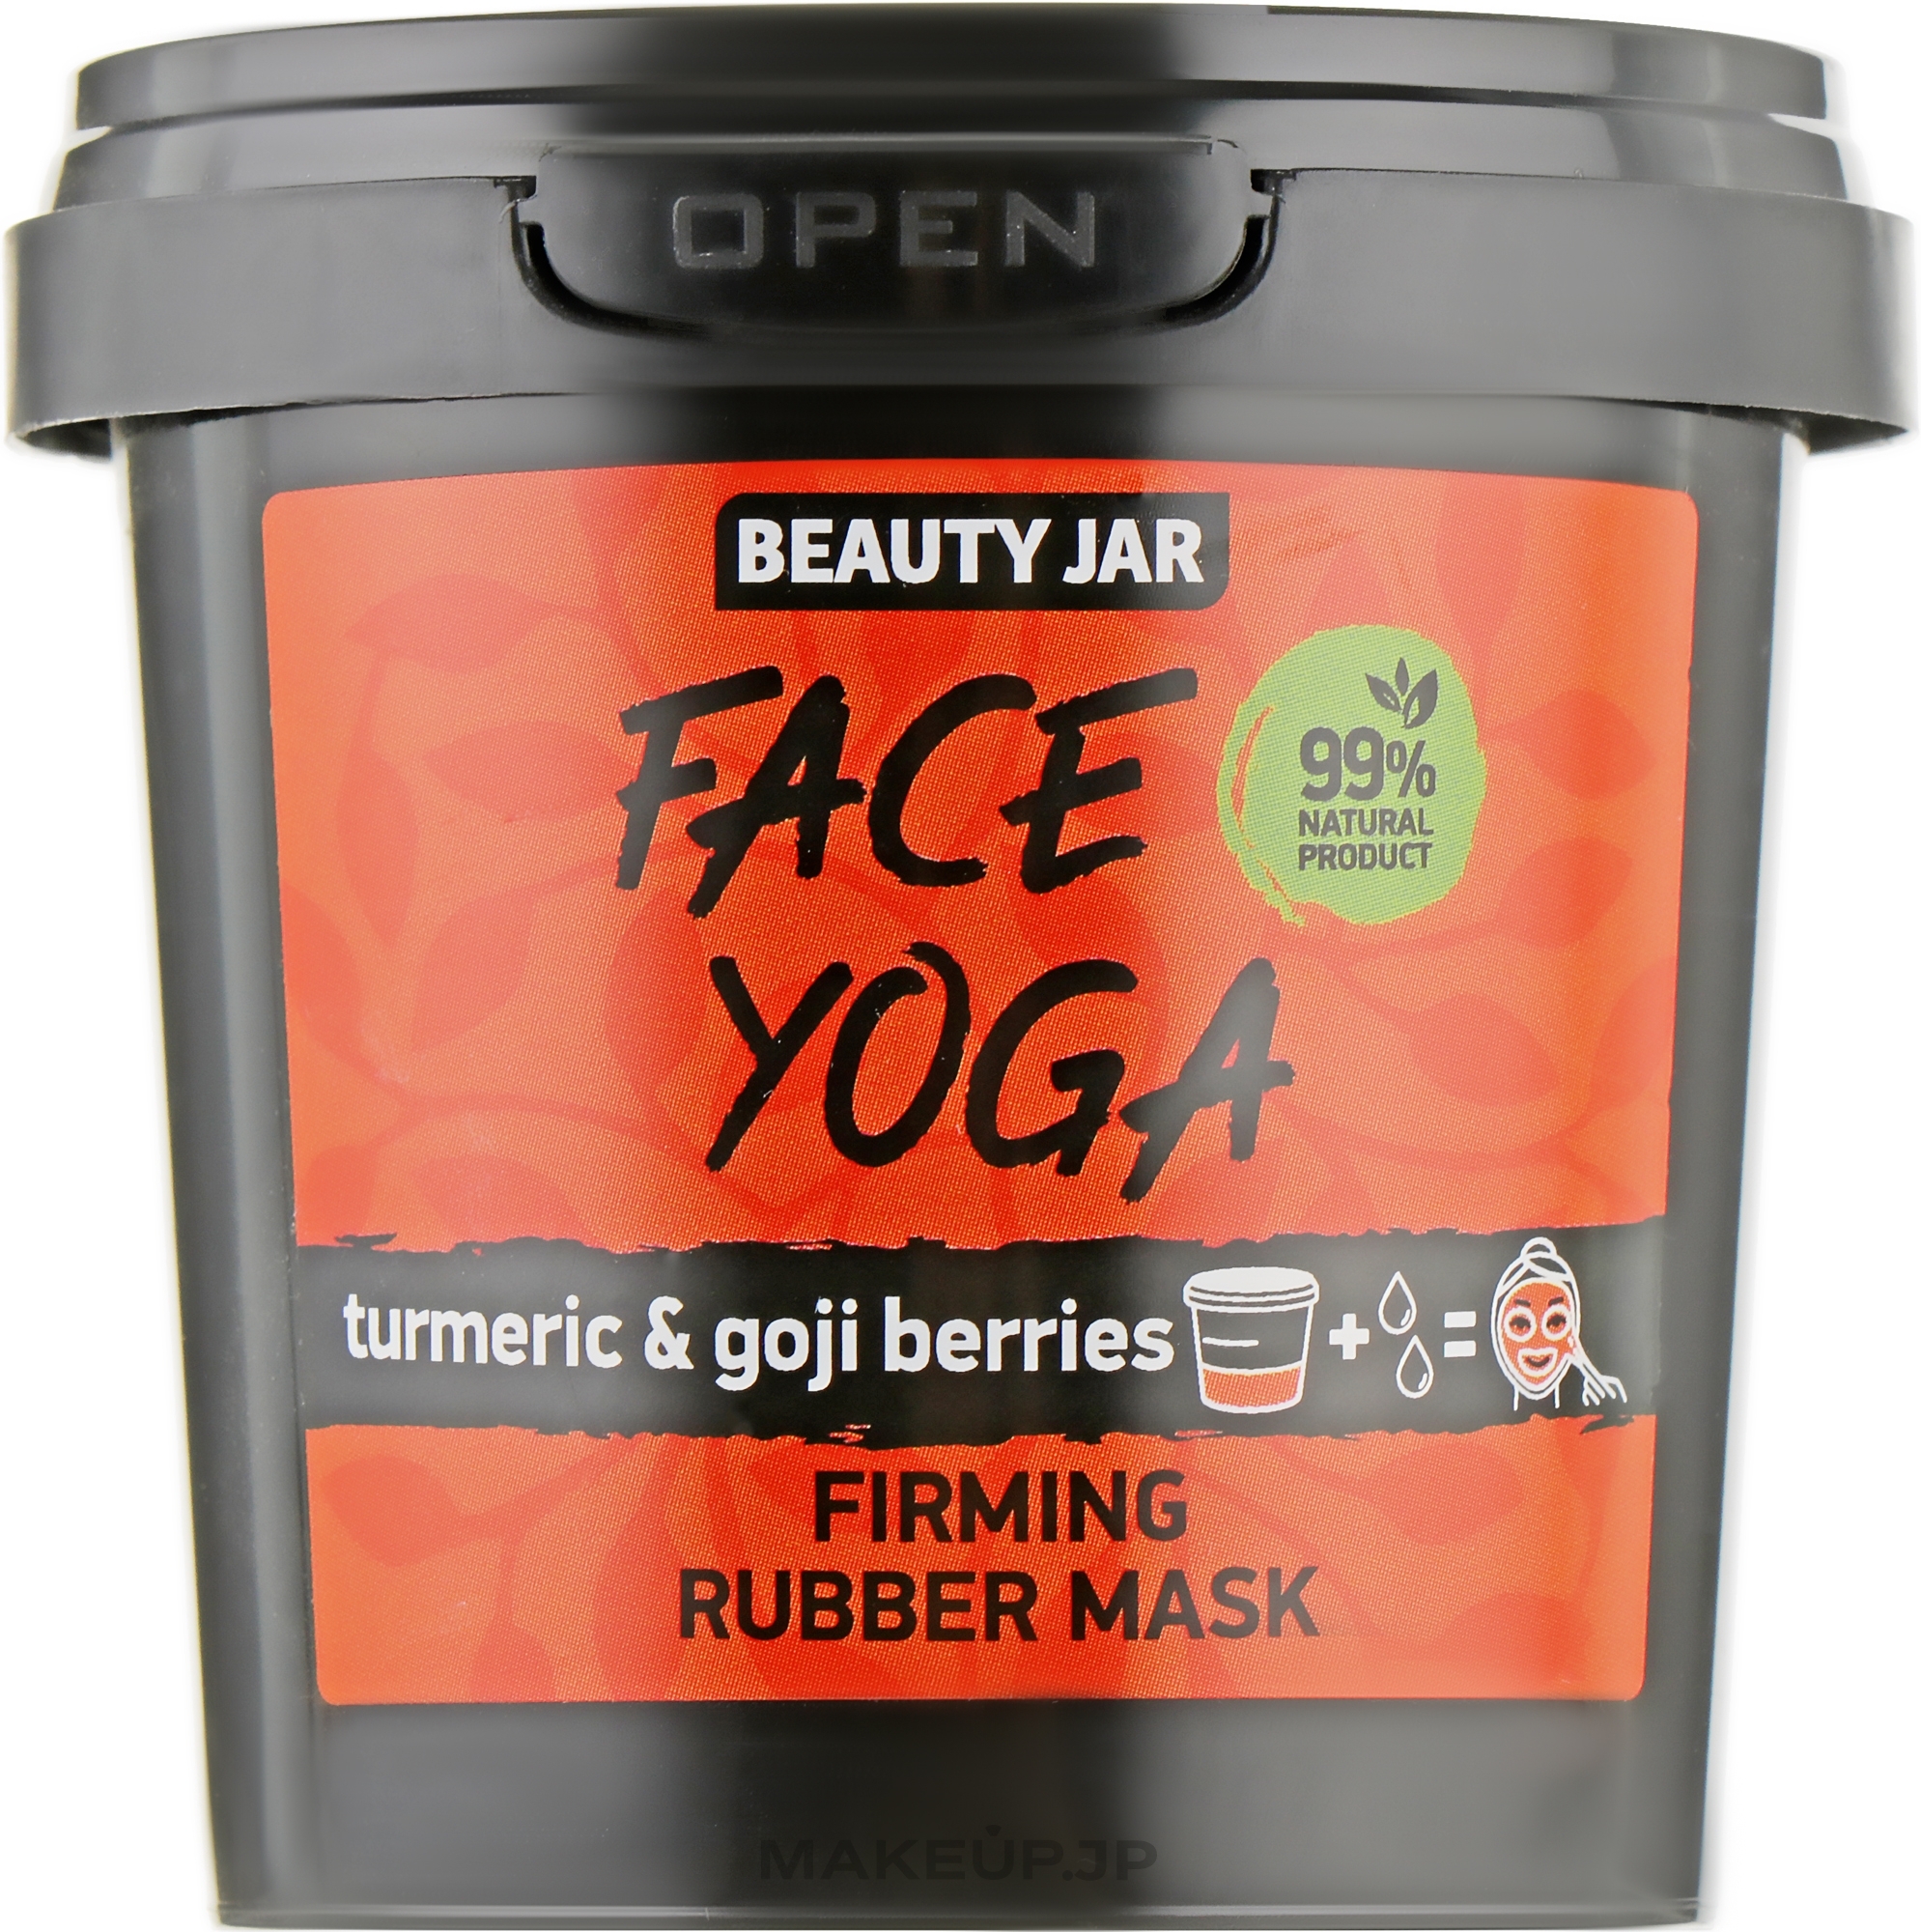 Peel-Off Face Mask with Turmeric & Goji Berry Extracts - Beauty Jar Fase Yoga Firming Rubber Mask — photo 20 g